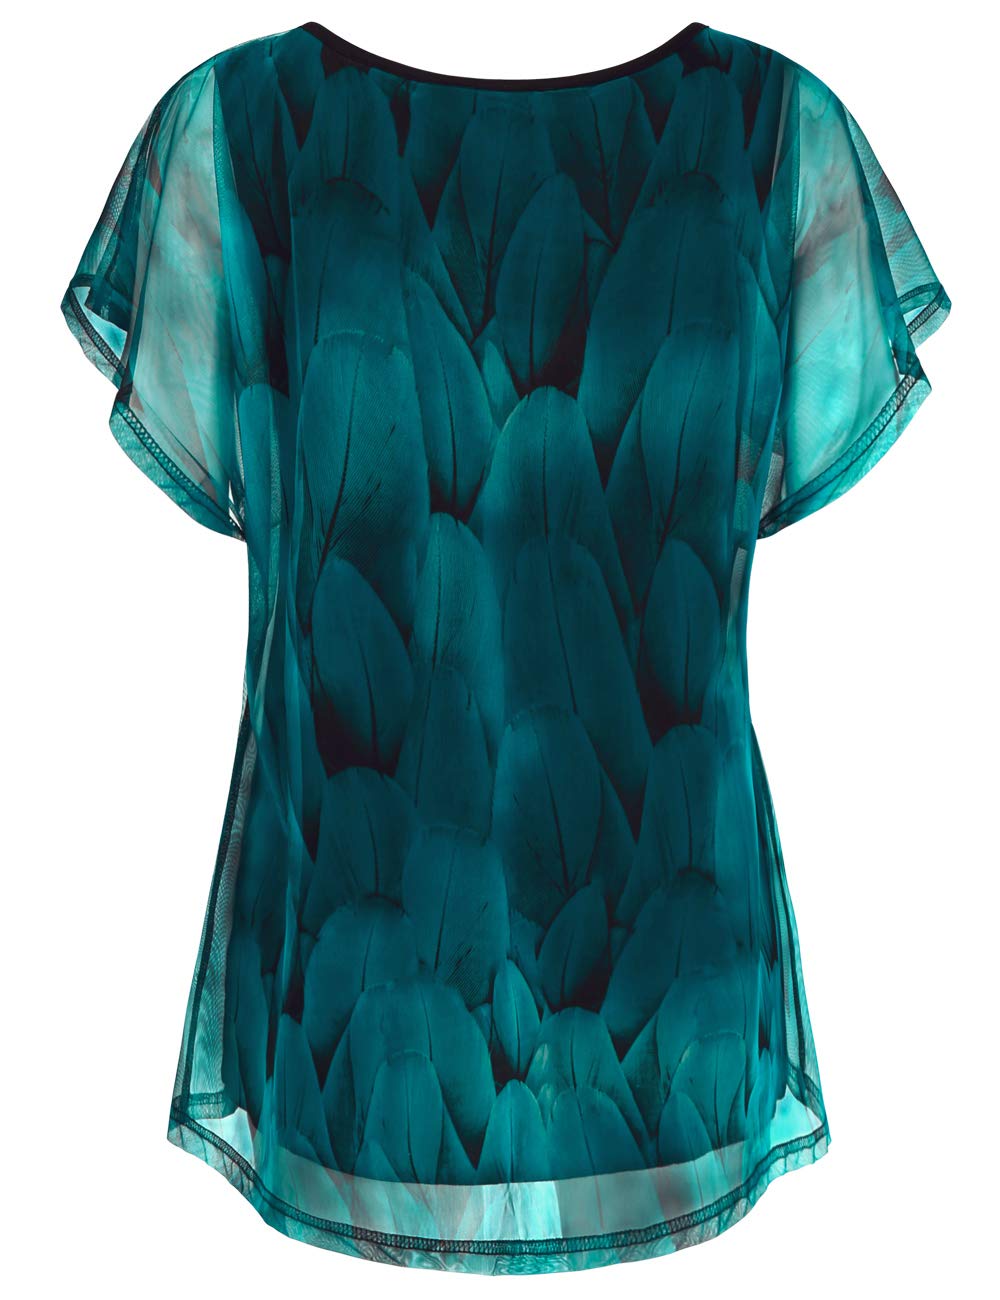 BAISHENGGT Peacock Blue Womens Flouncing Flared Short Sleeve Pleated Front Mesh Blouses Tops